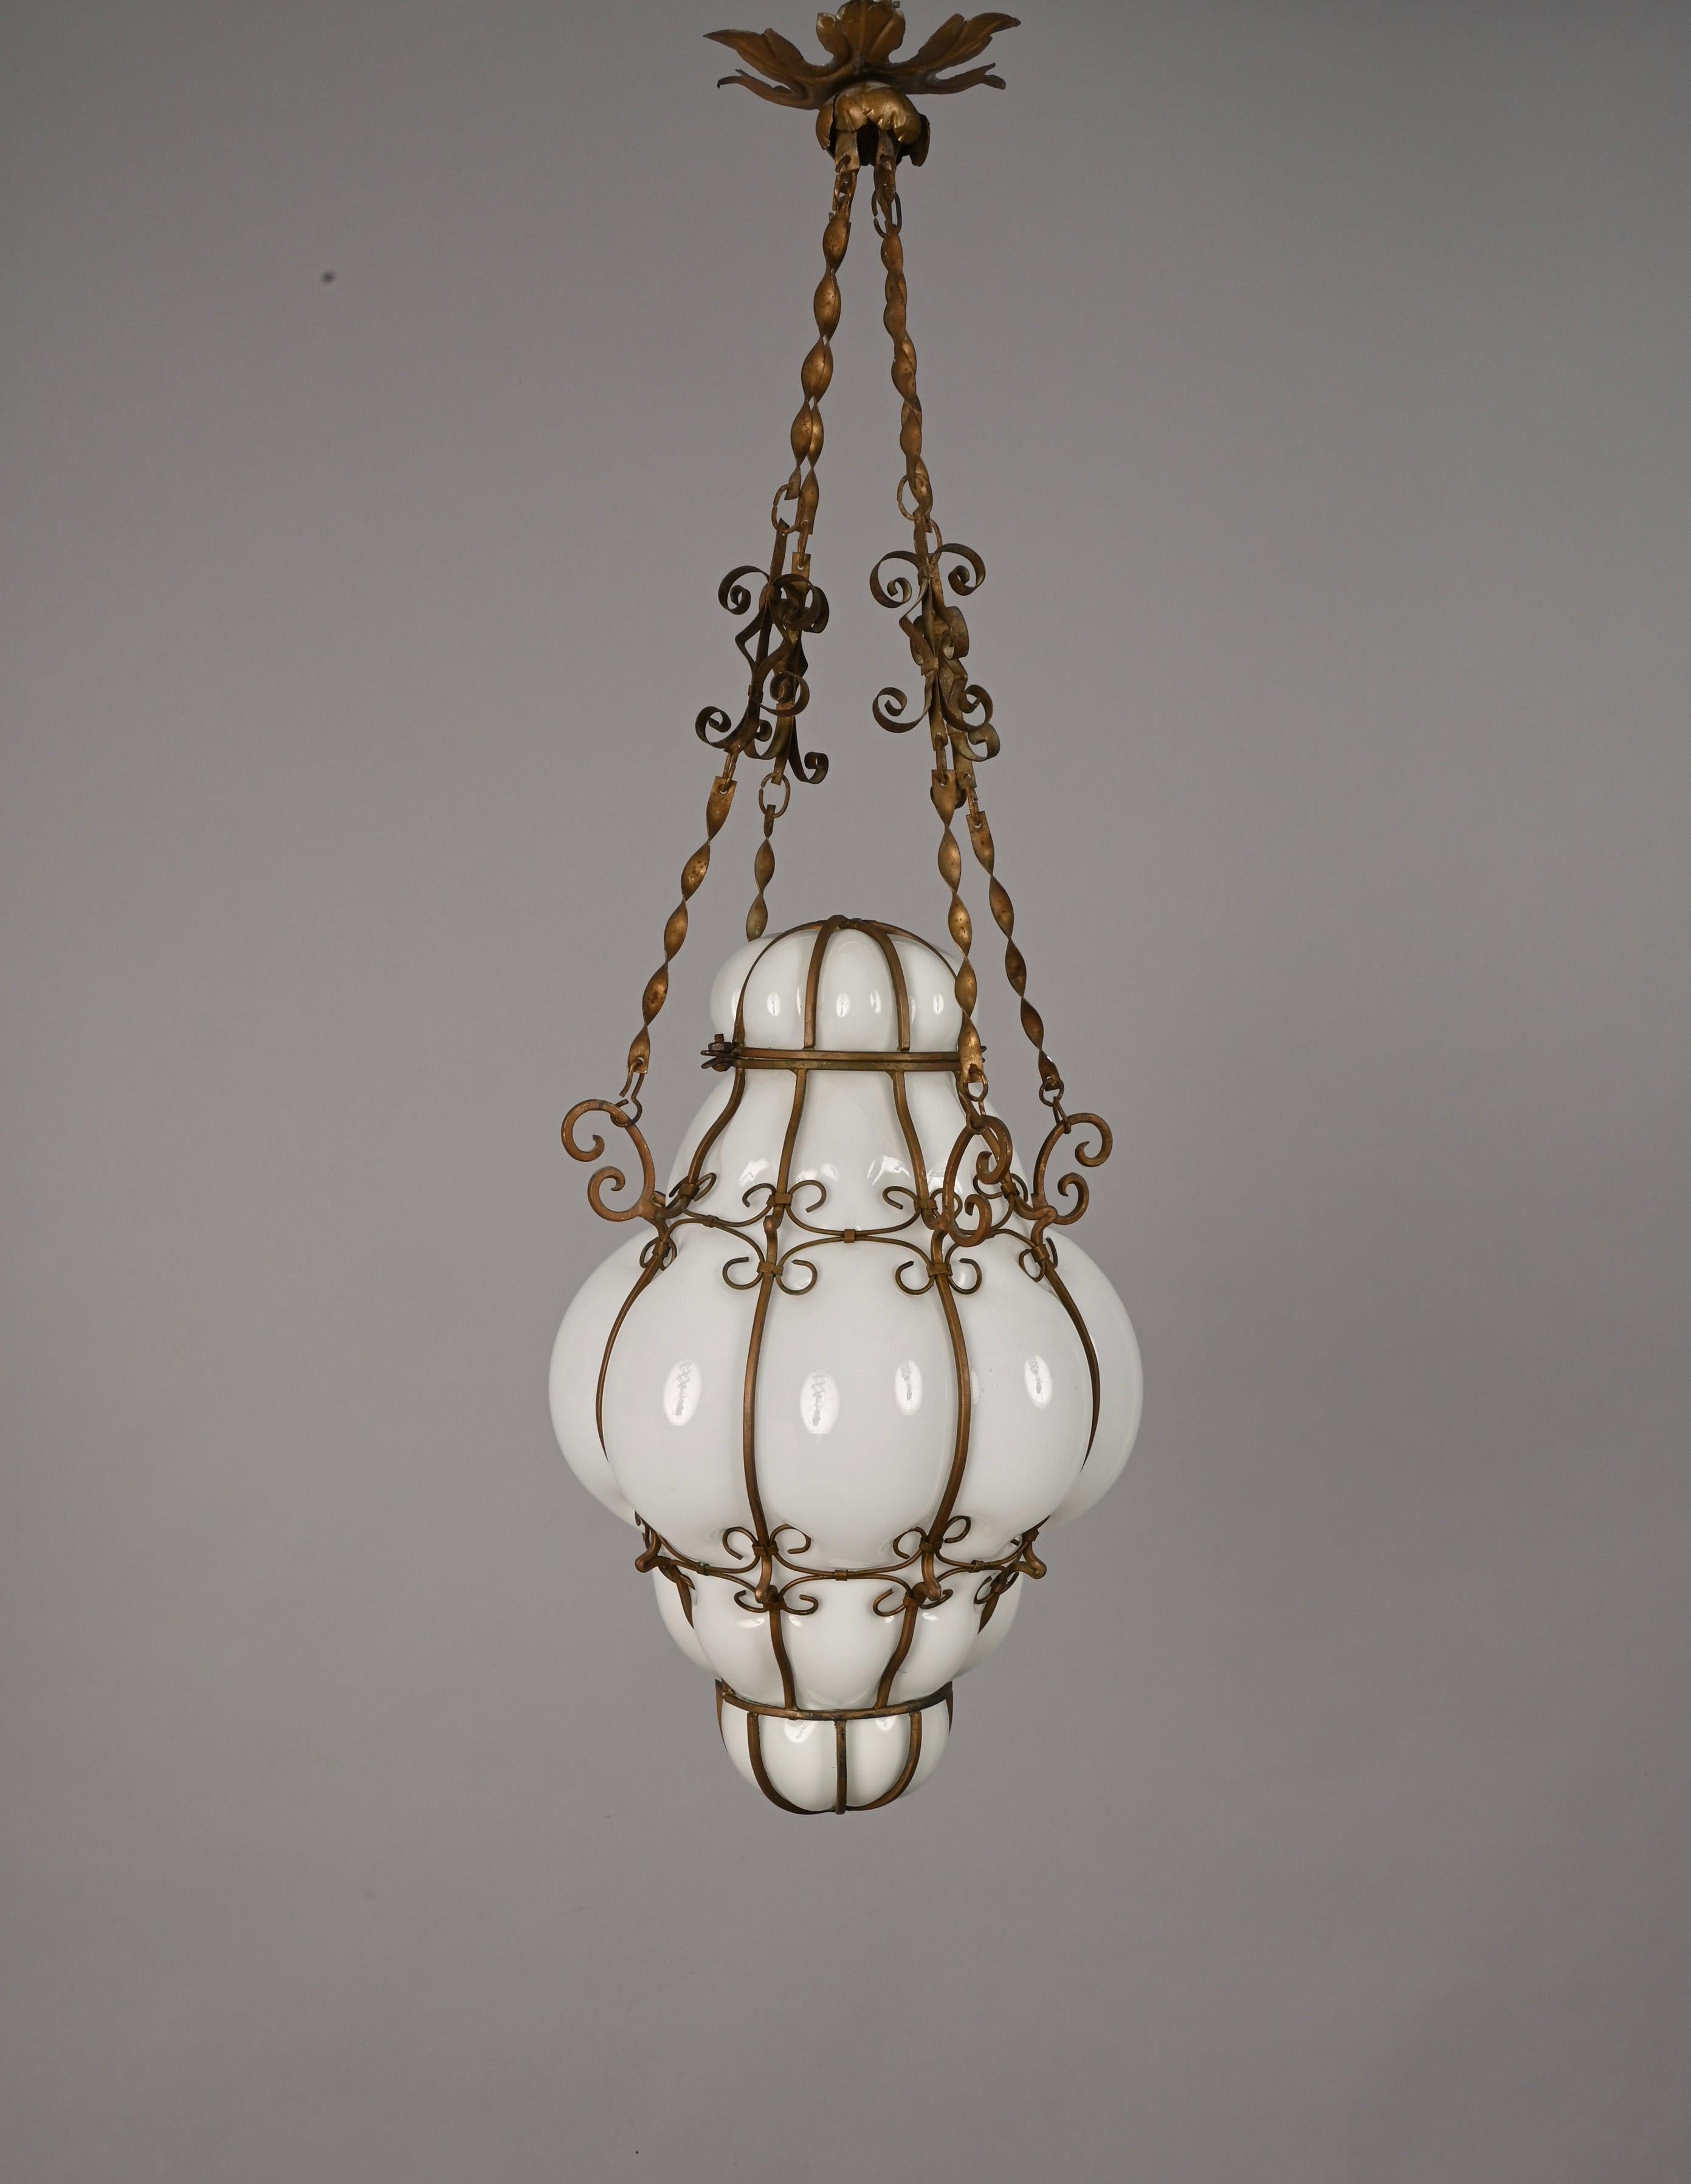 Art Glass Midcentury Venetian Brass and Mouth Blown Murano White Glass Chandelier, 1940s For Sale